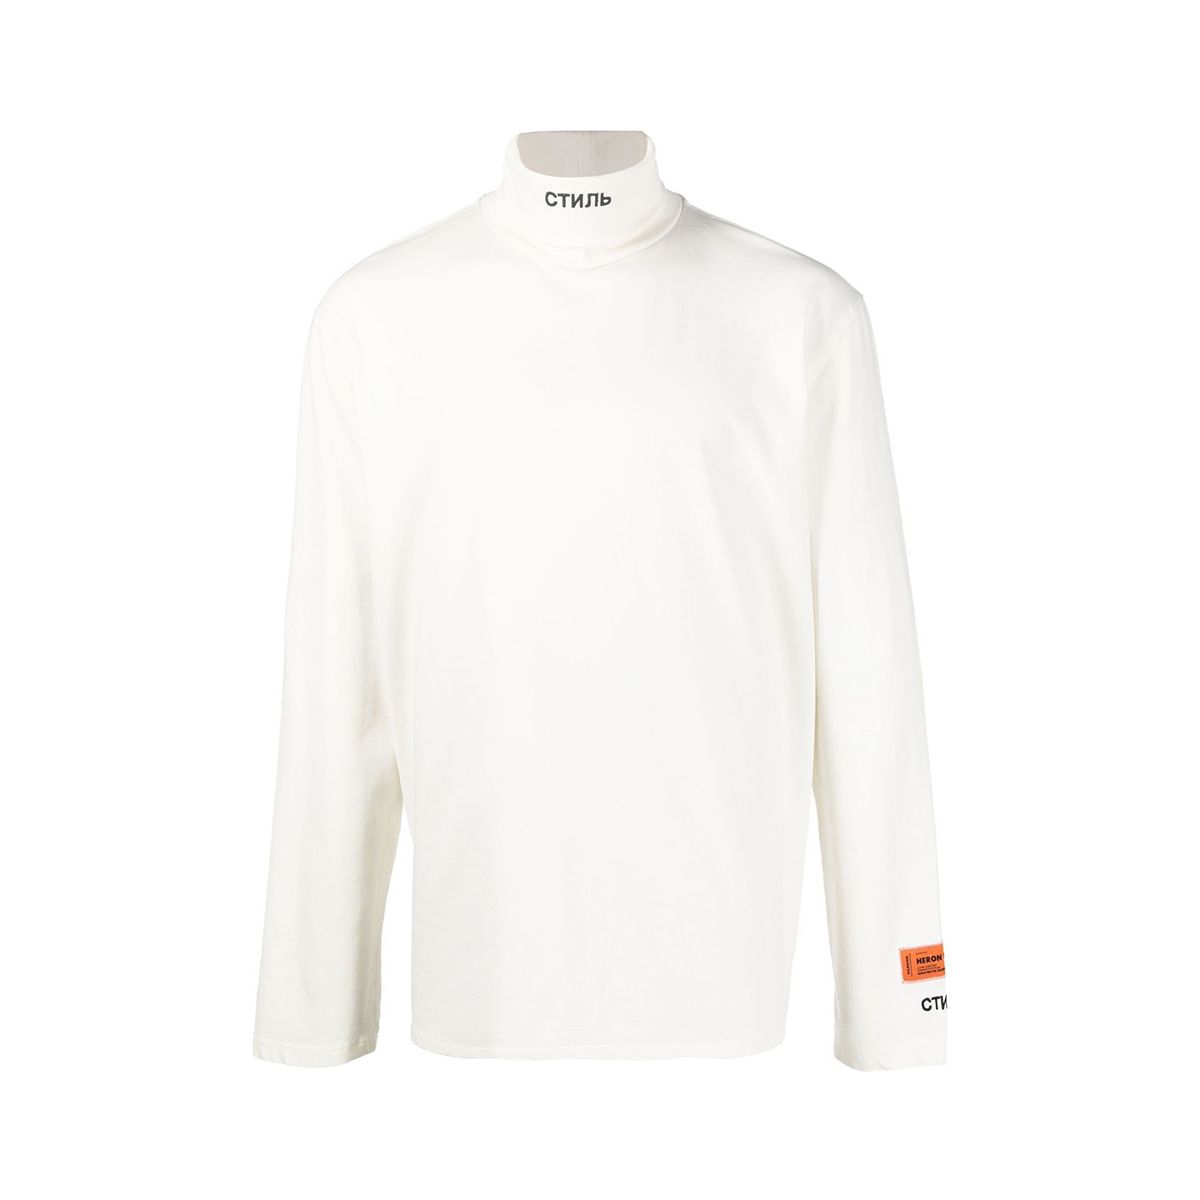 CTNMB Roll-Neck White Top